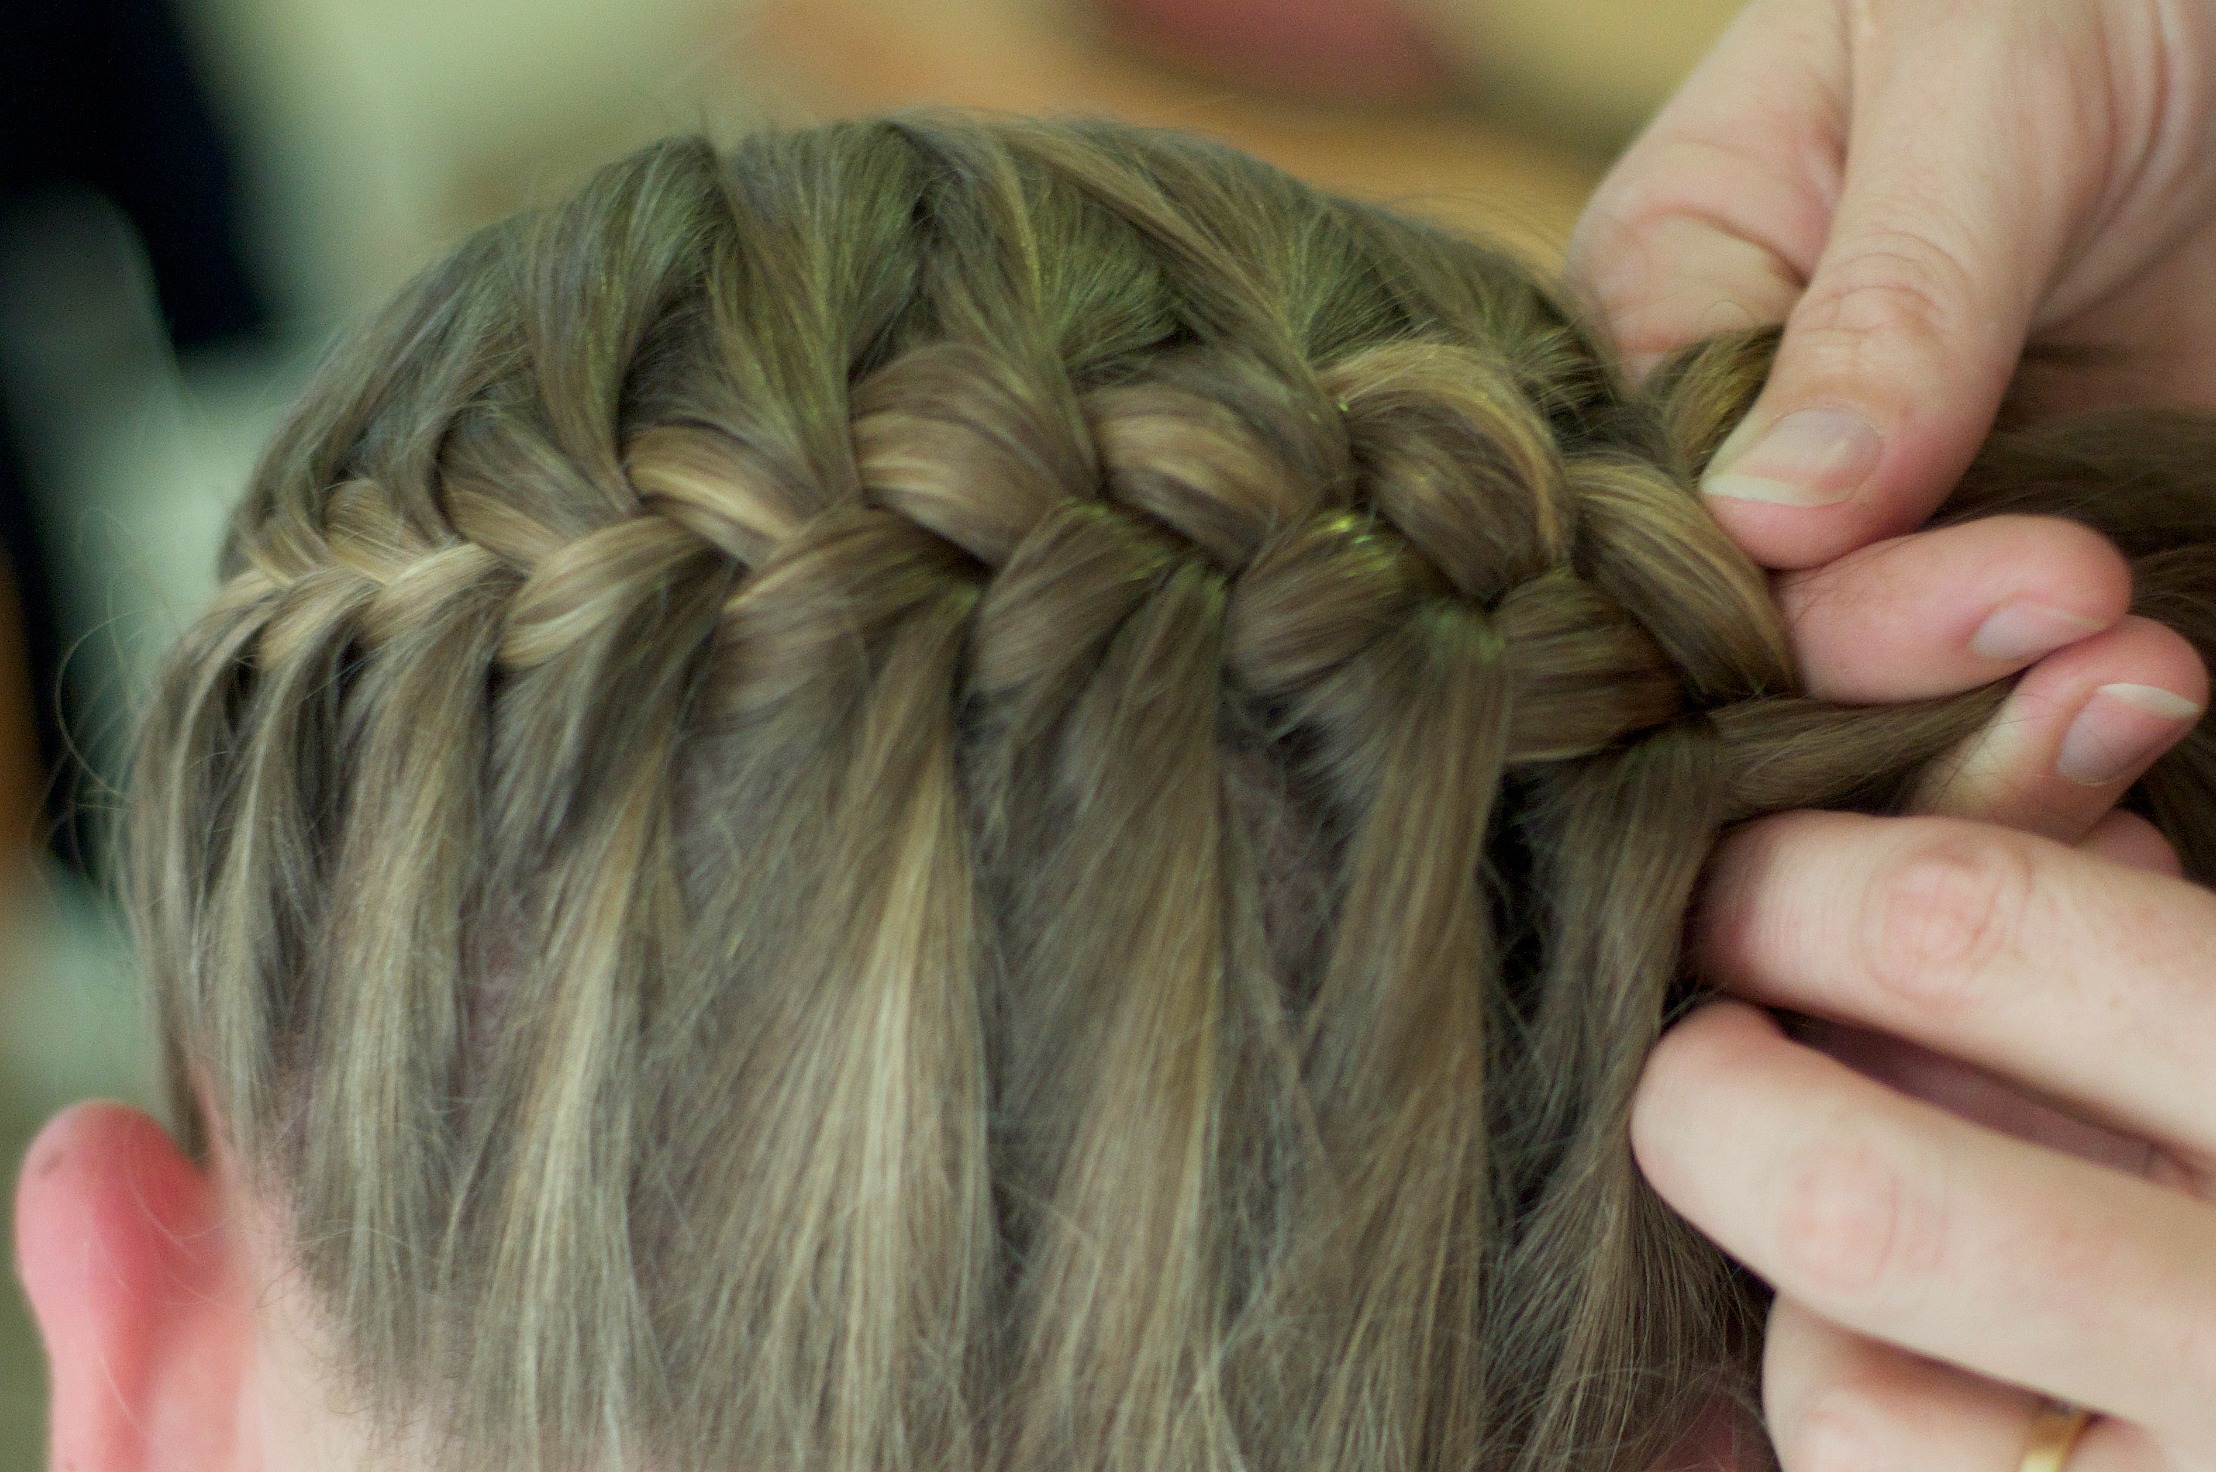 How to Do a Side Braid in 4 Easy Steps